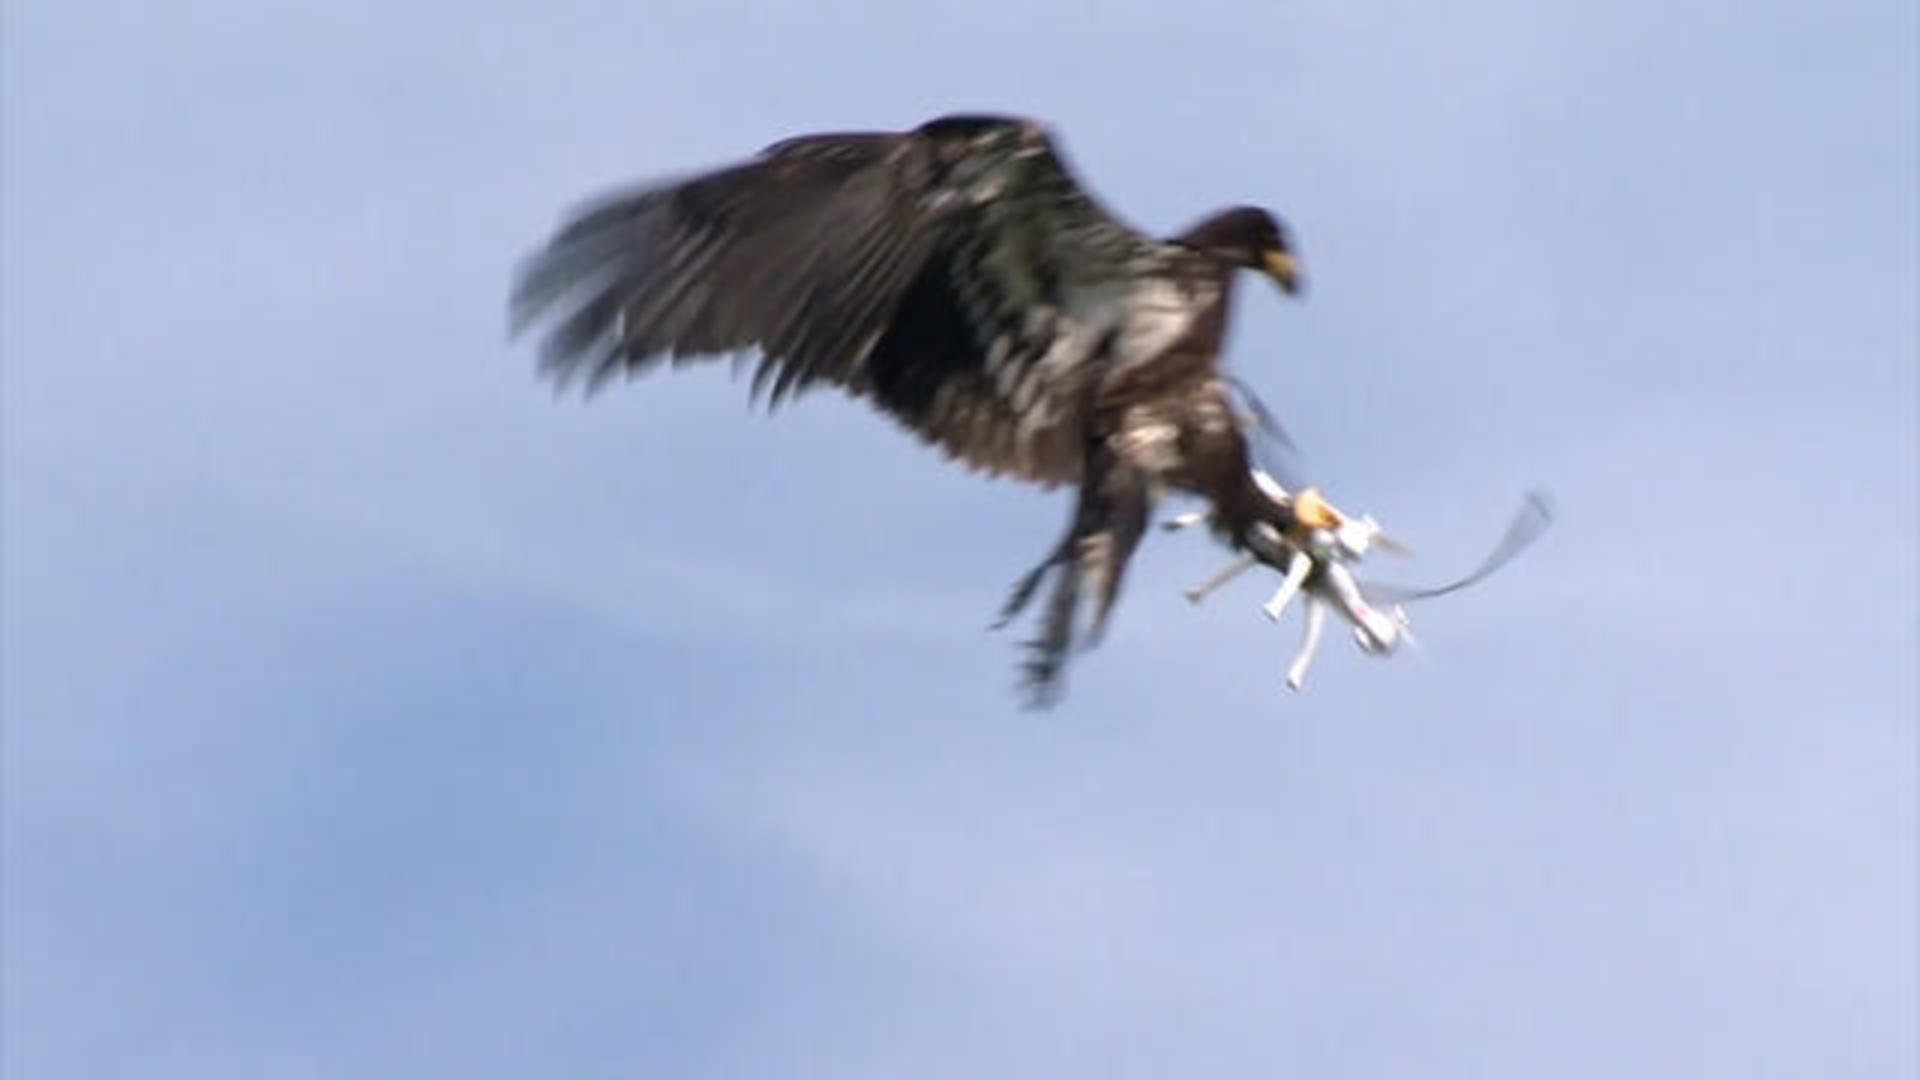 brink Downward Criticism Watch: Trained eagle snatches drones from the sky - CBS News